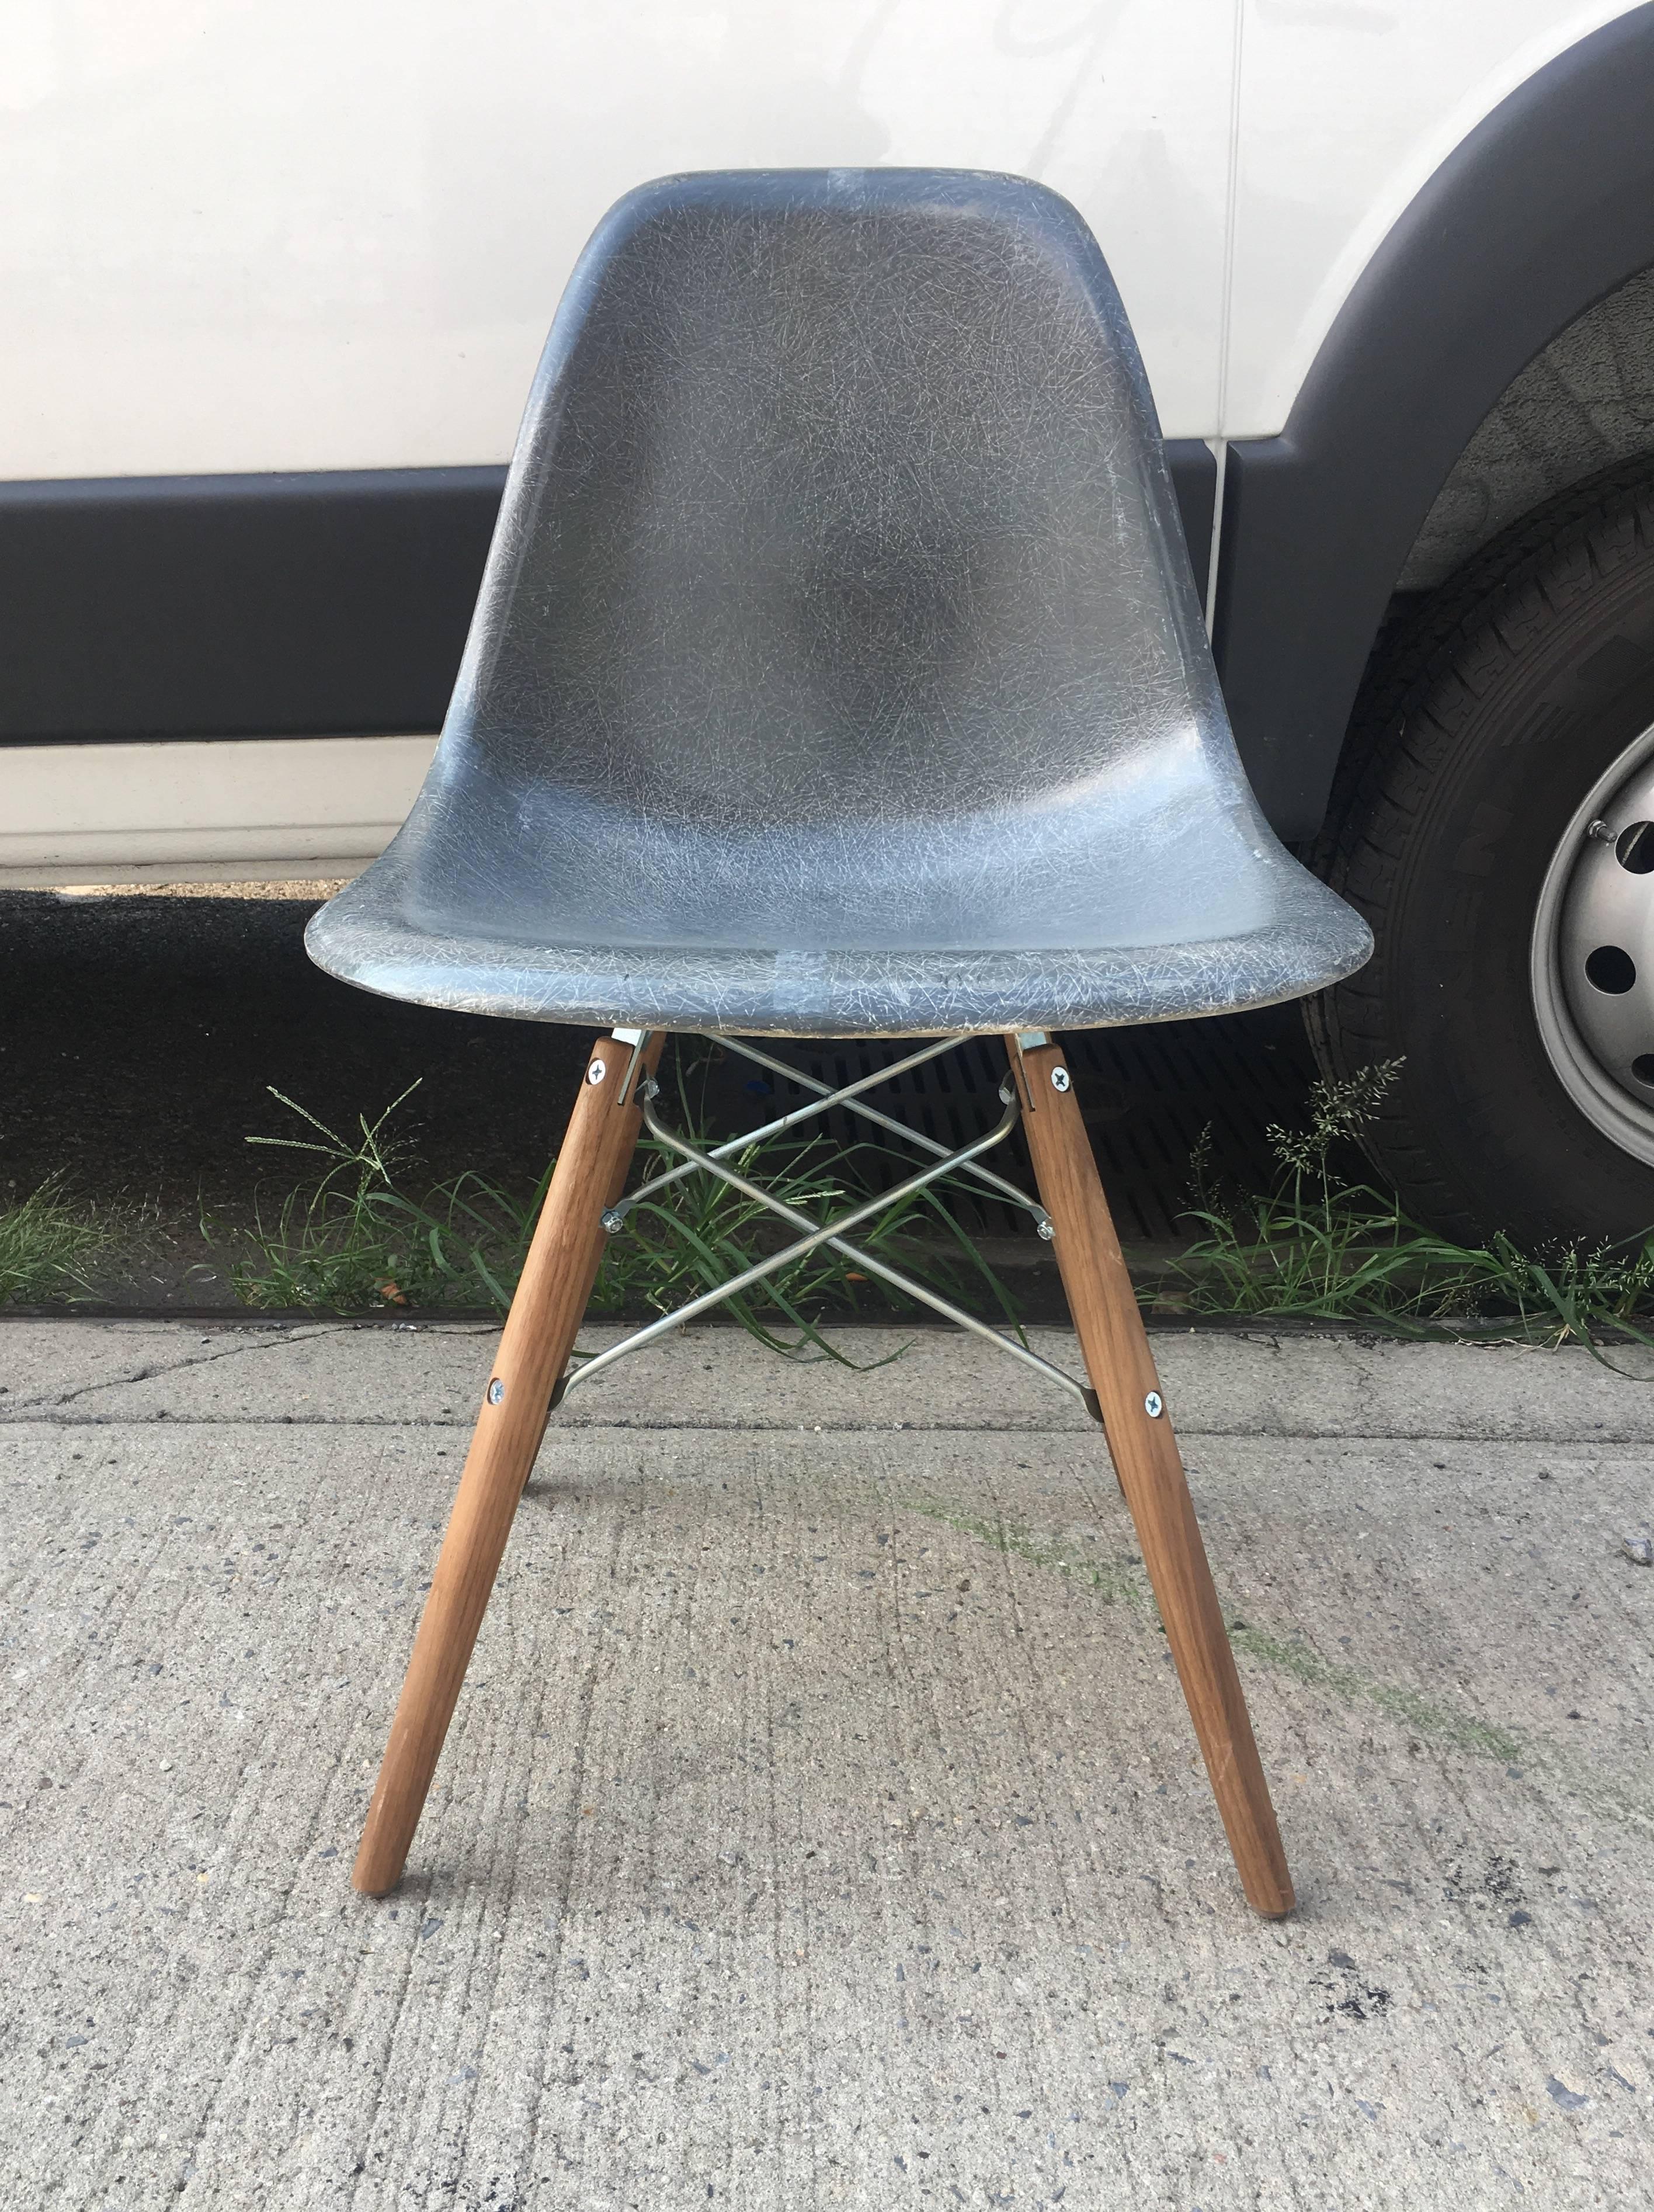 Set of eight Eames dining chairs. Four in navy and four in elephant grey. New walnut bases. In excellent condition. Ships disassembled.